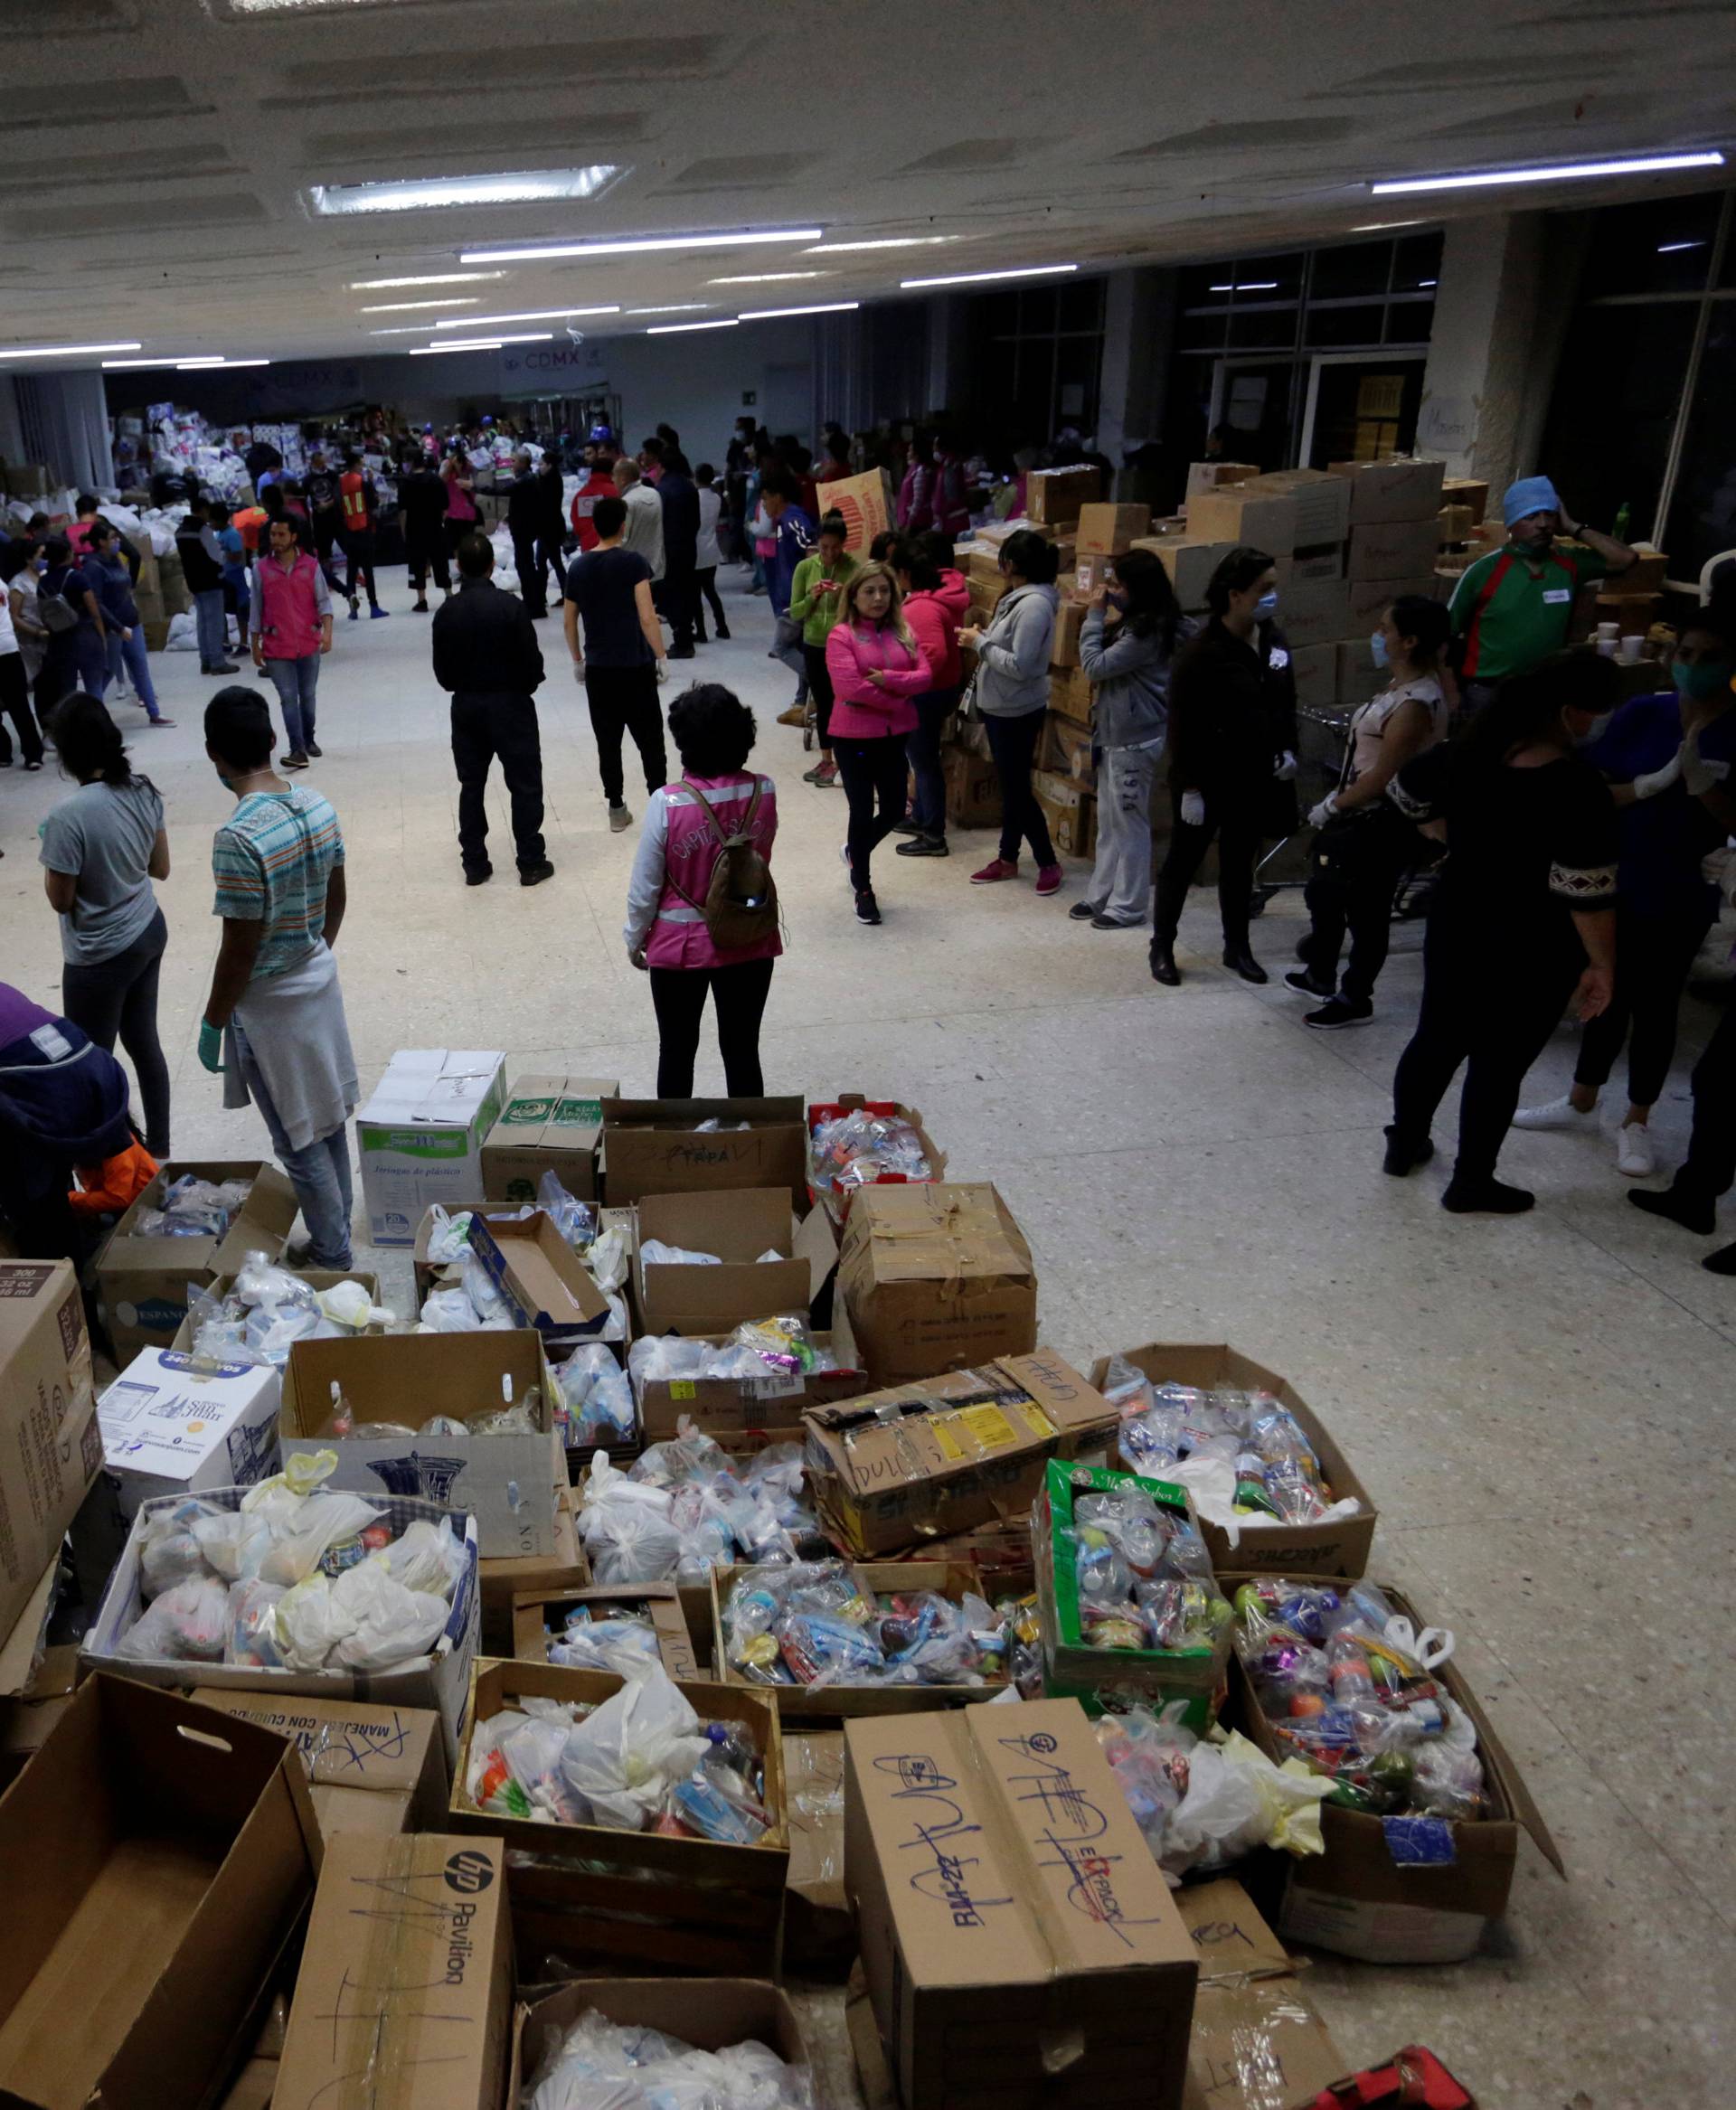 People stand in a shelter and collection center after an earthquake in Mexico City